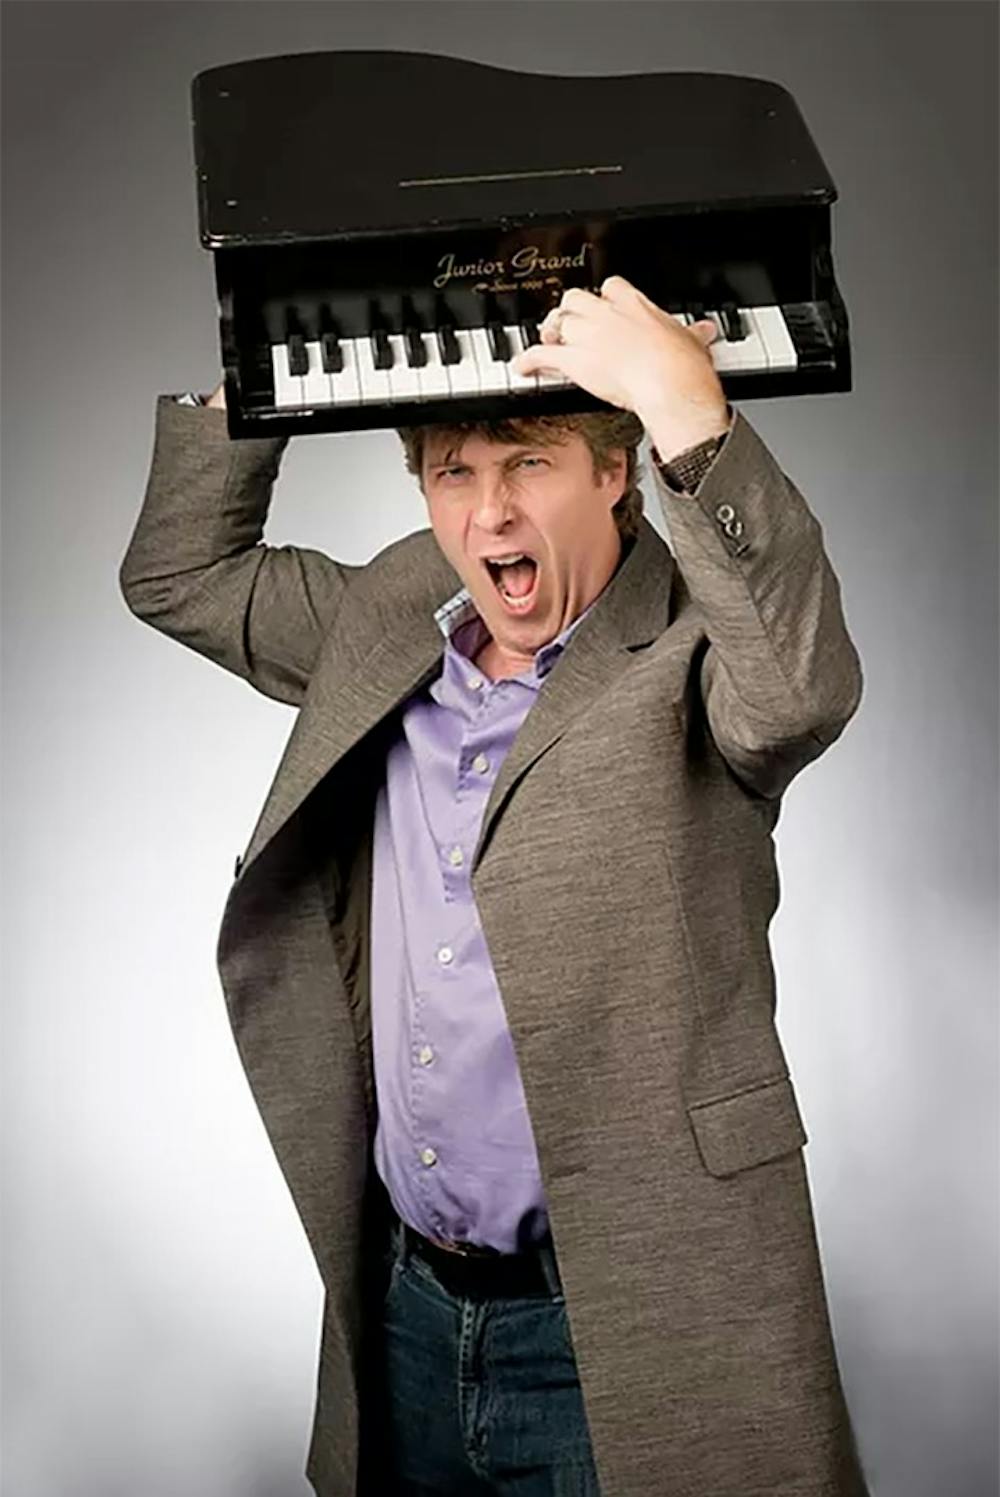 Cutler holds a toy piano over his head for a photoshoot.